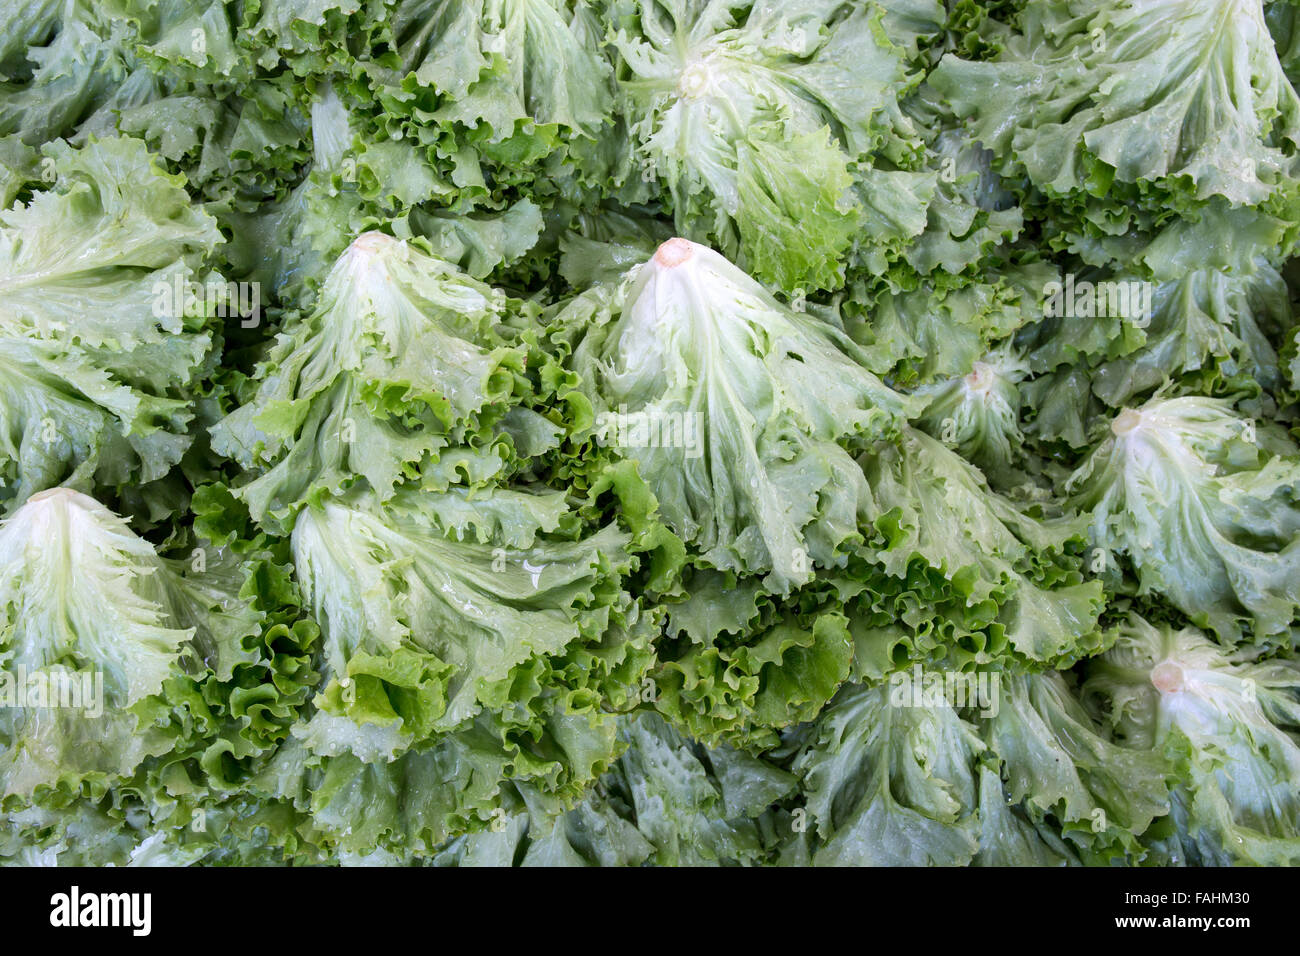 Lettuces with crinkly leaves Stock Photo